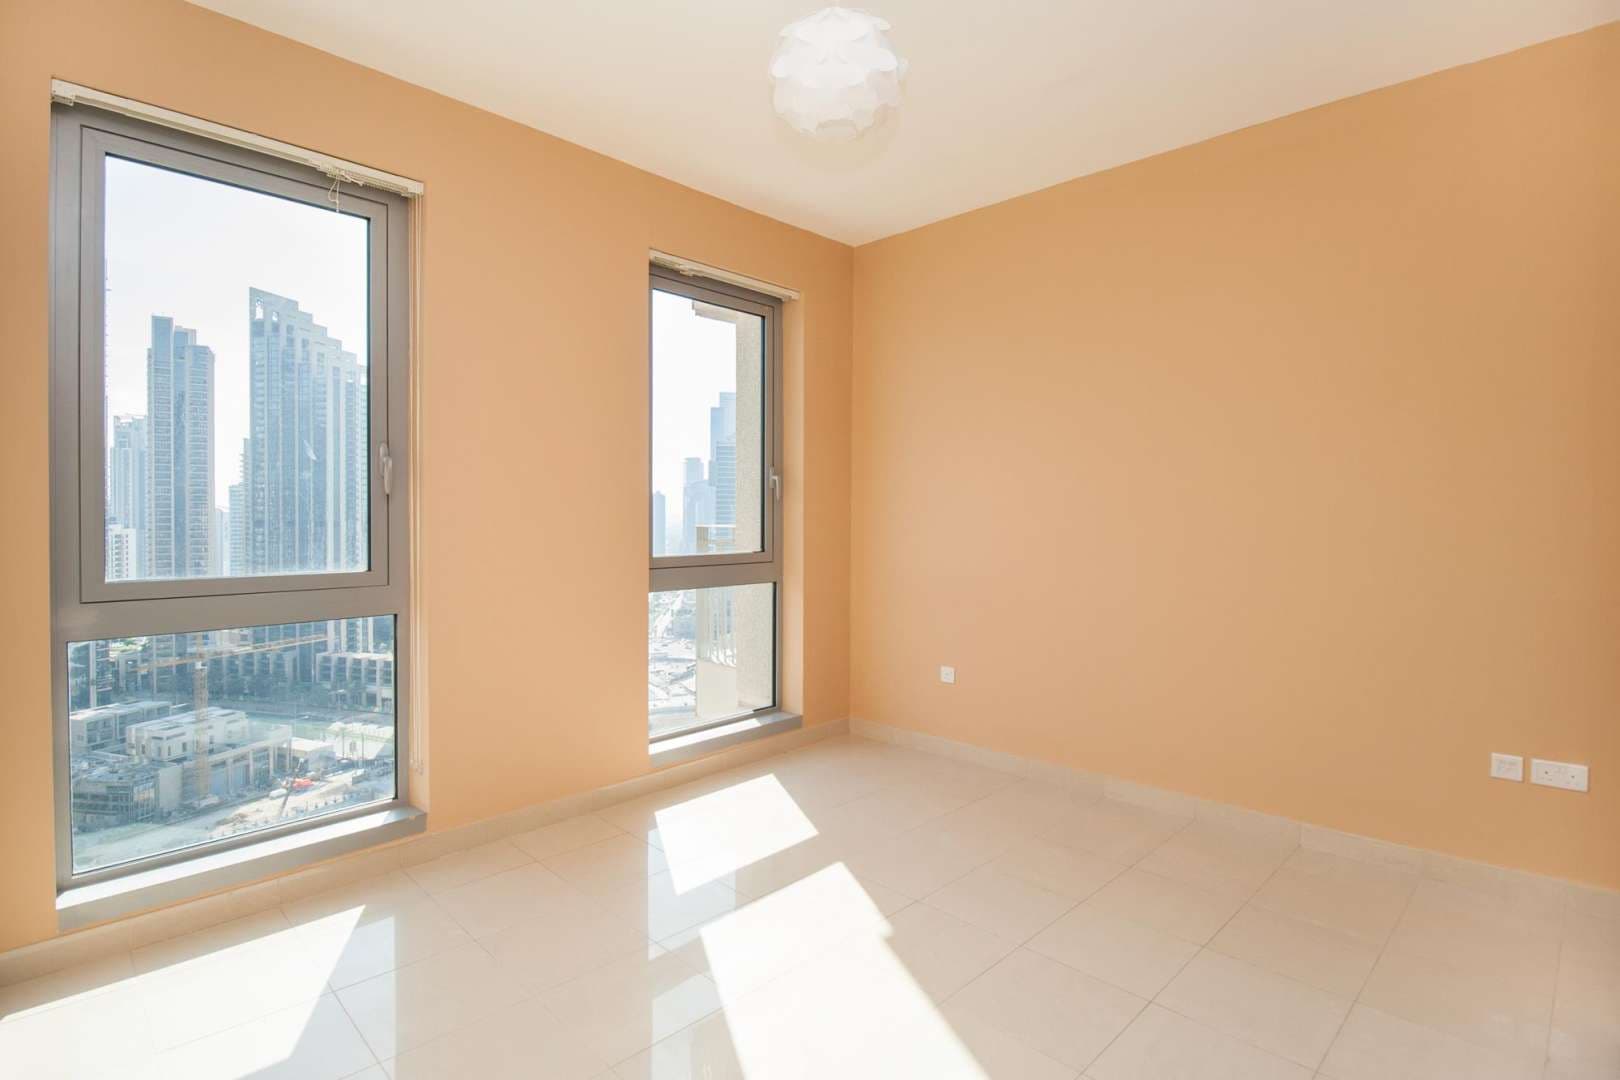 3 Bedroom Apartment For Rent Standpoint Tower A Lp05393 E30e6c8c2359000.jpg